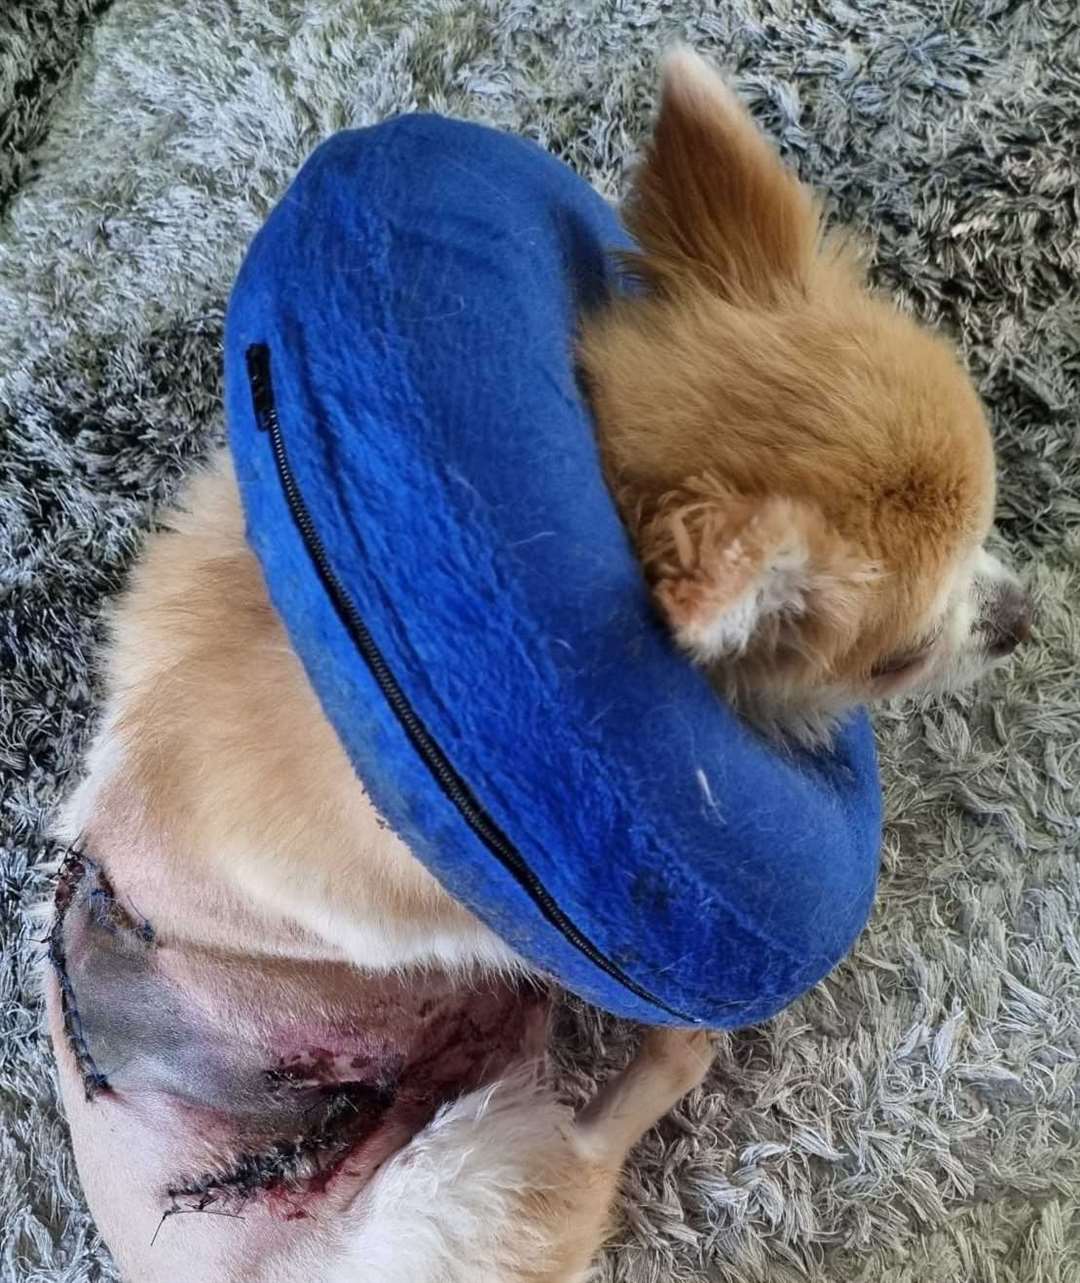 Chihuahua Buzz has been left with serious wounds after being attacked